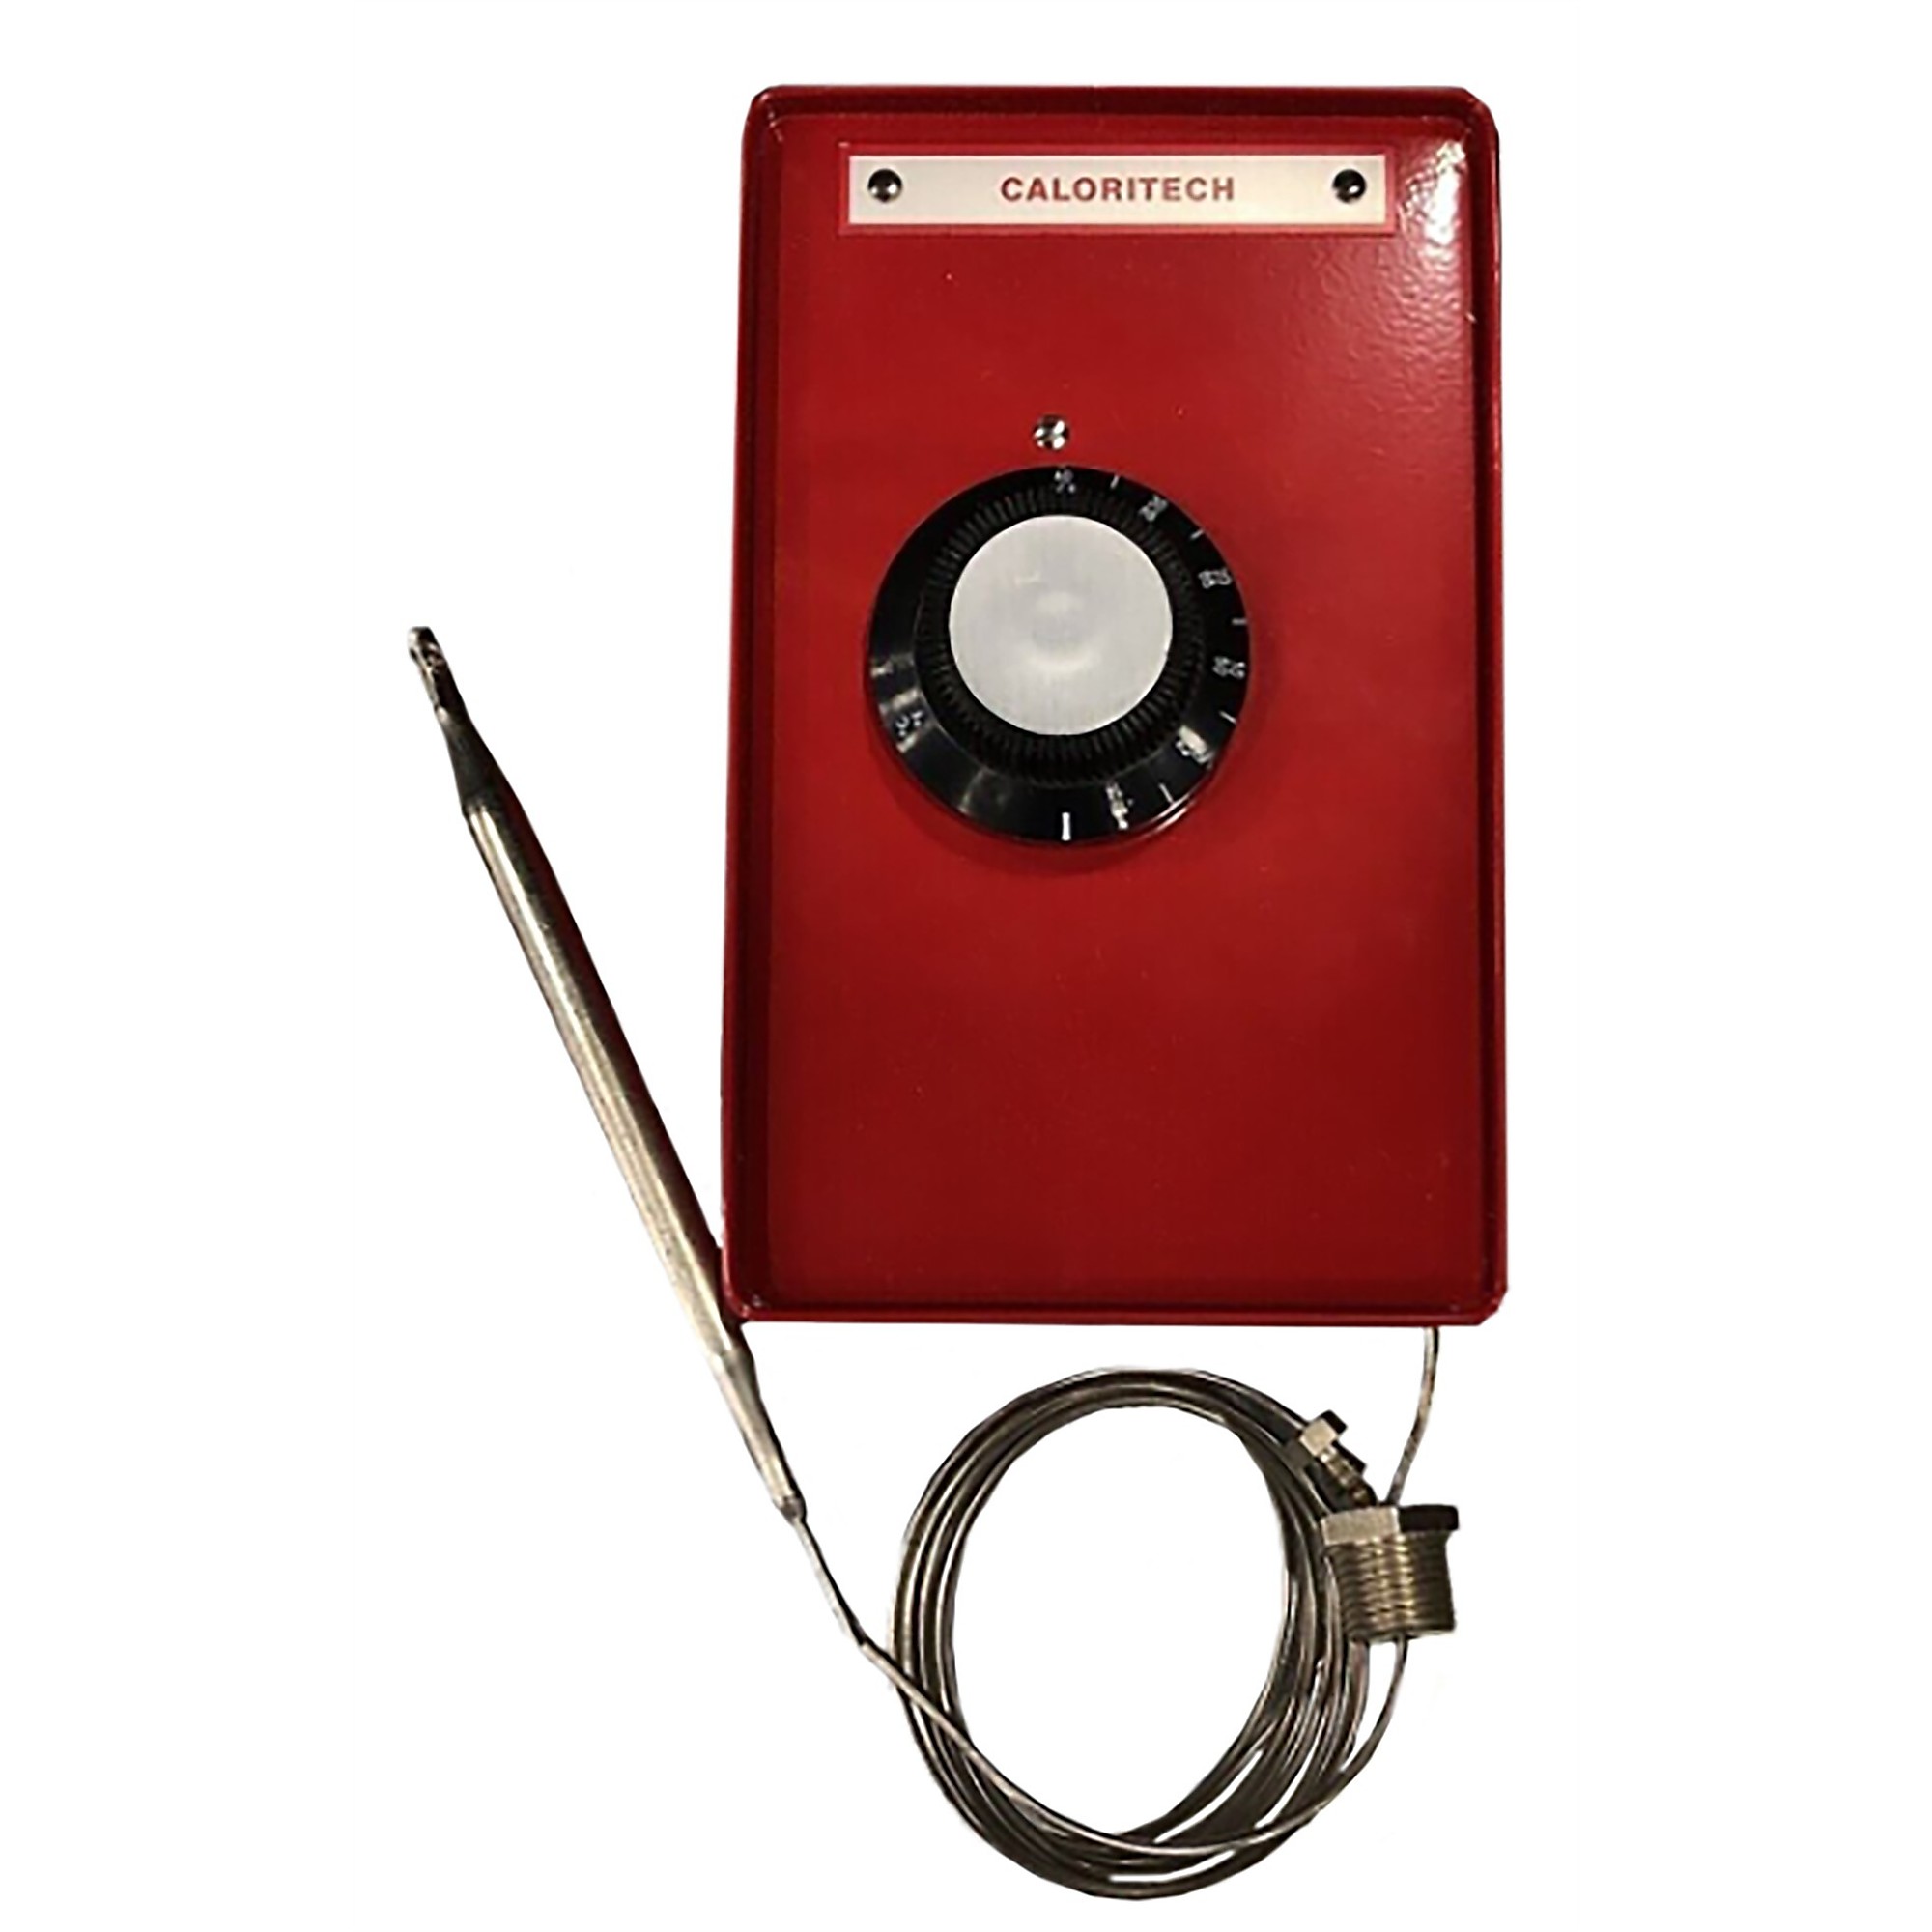 Caloritech AR Series 0F to 100F Copper, Compatible With Caloritech AR Series Industrial Thermostat, Model AR0464